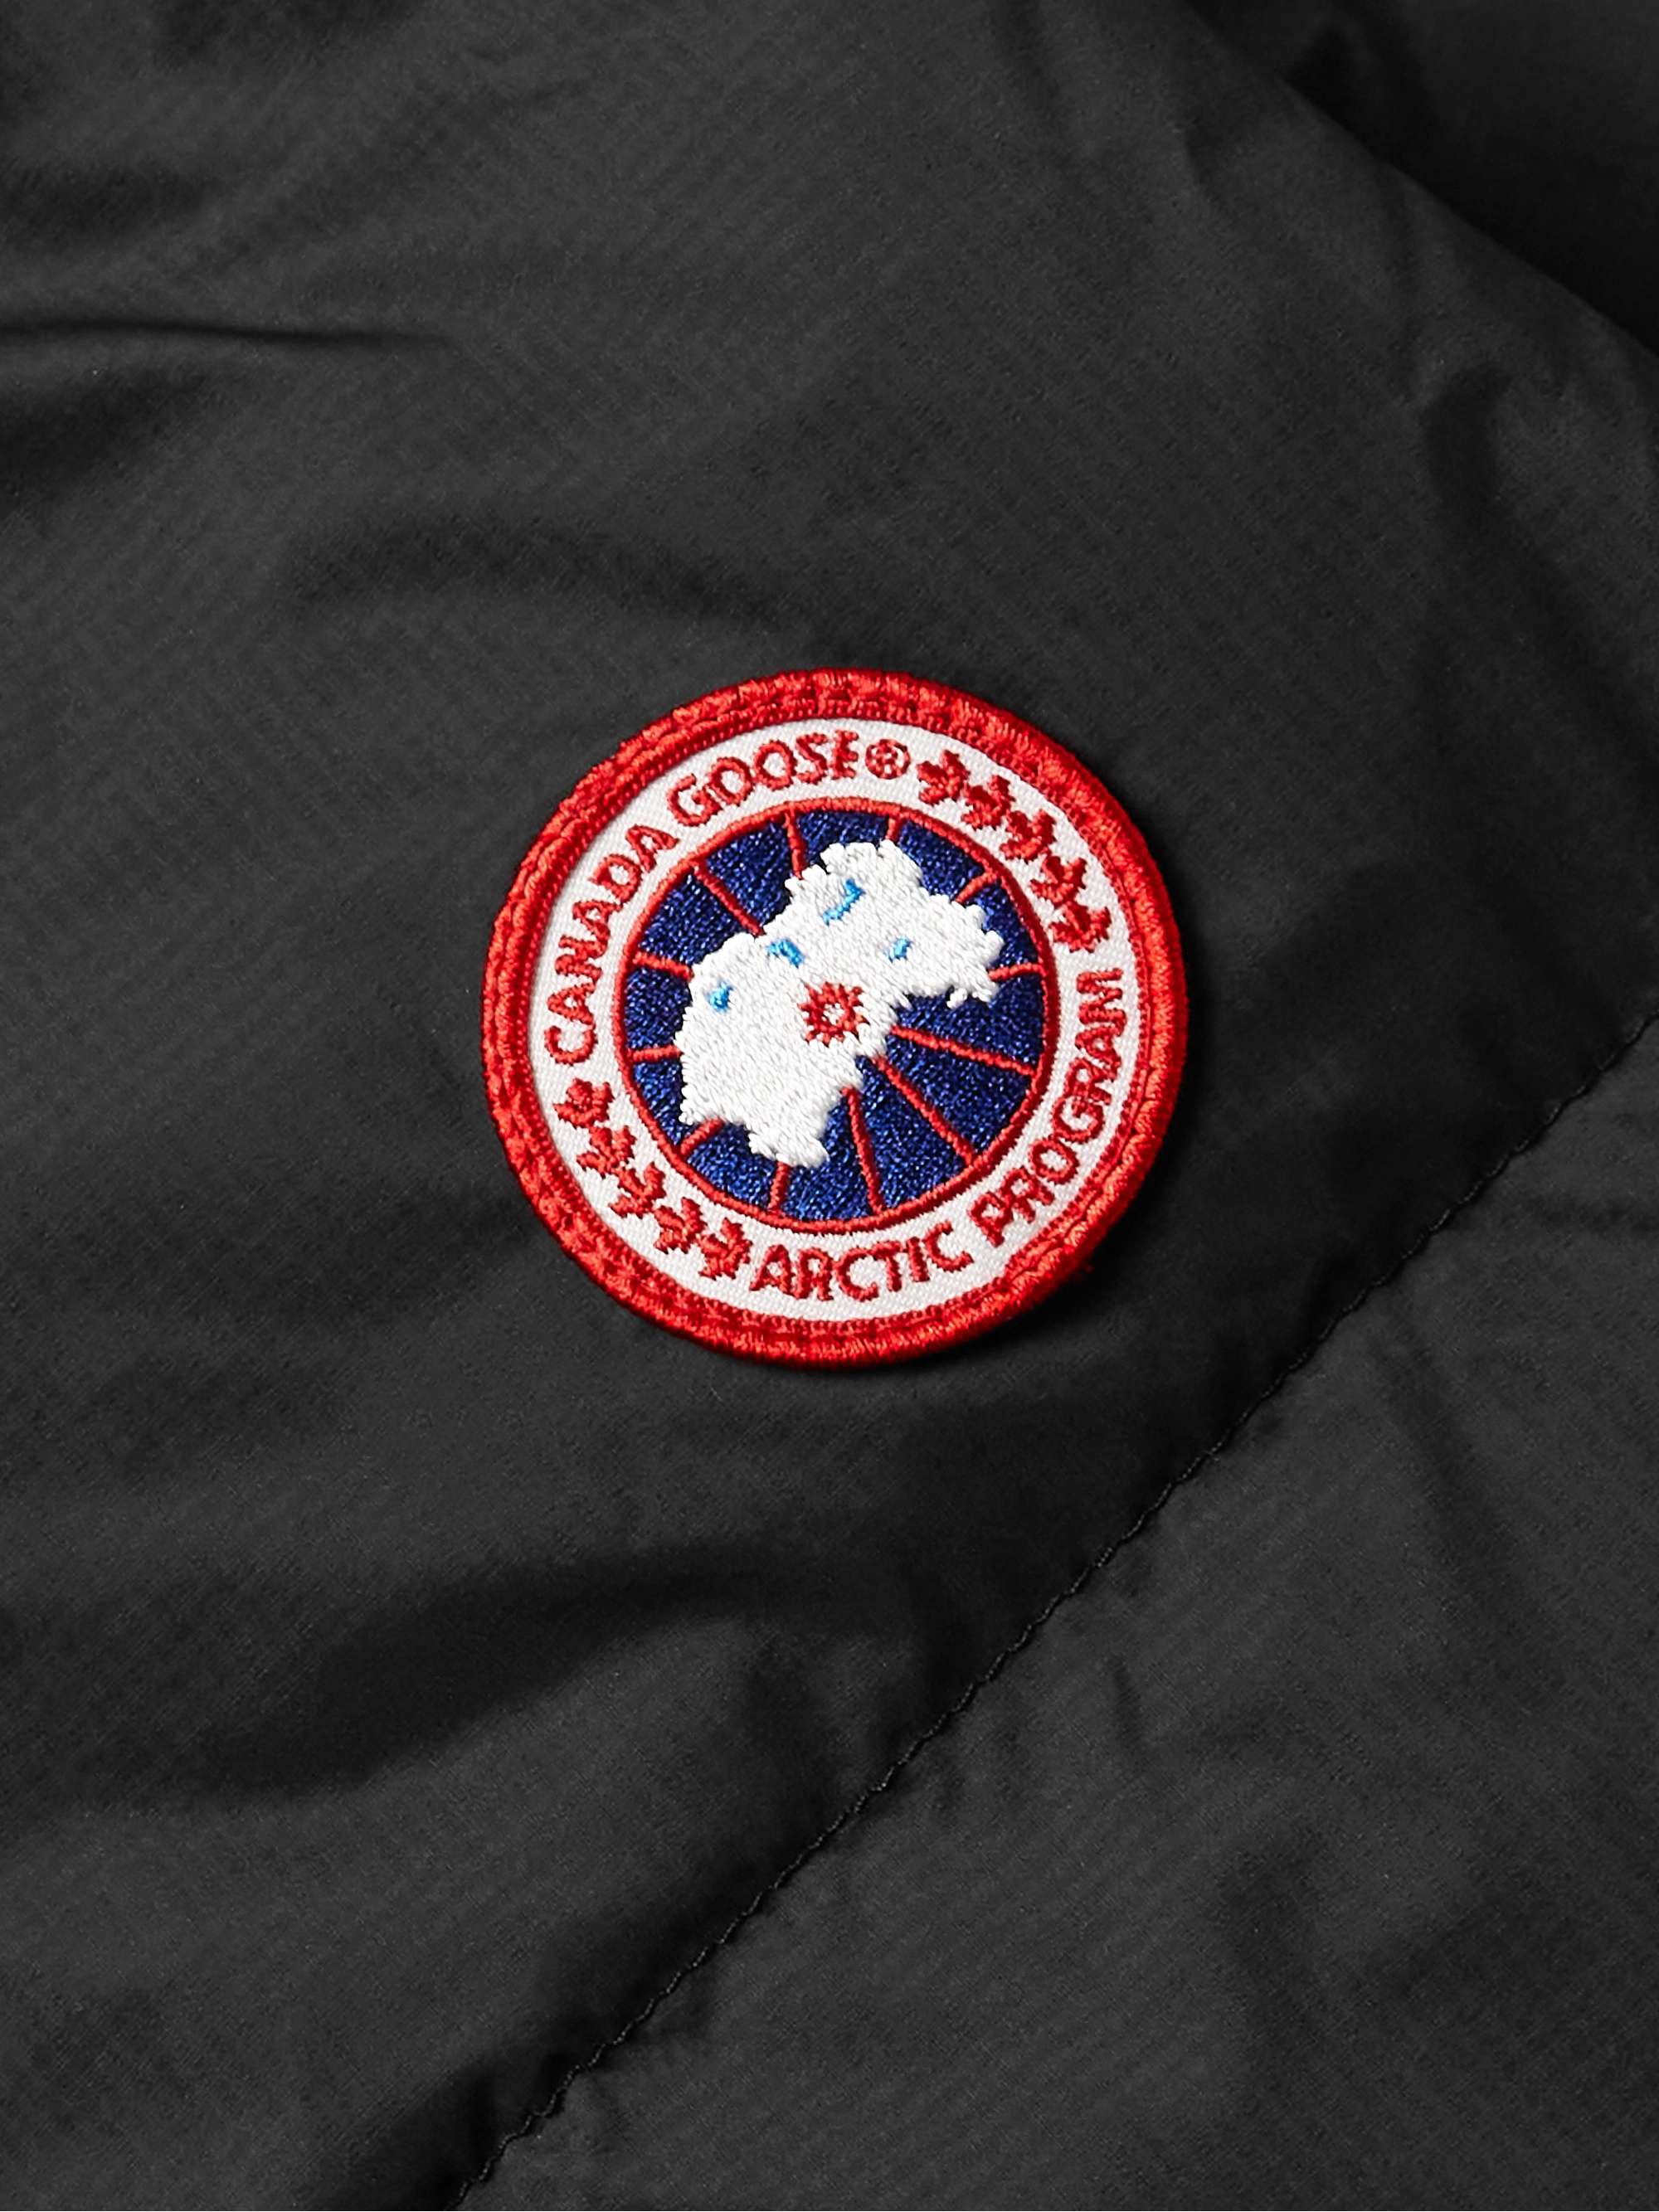 CANADA GOOSE Armstrong Packable Quilted Nylon-Ripstop Hooded Down Jacket